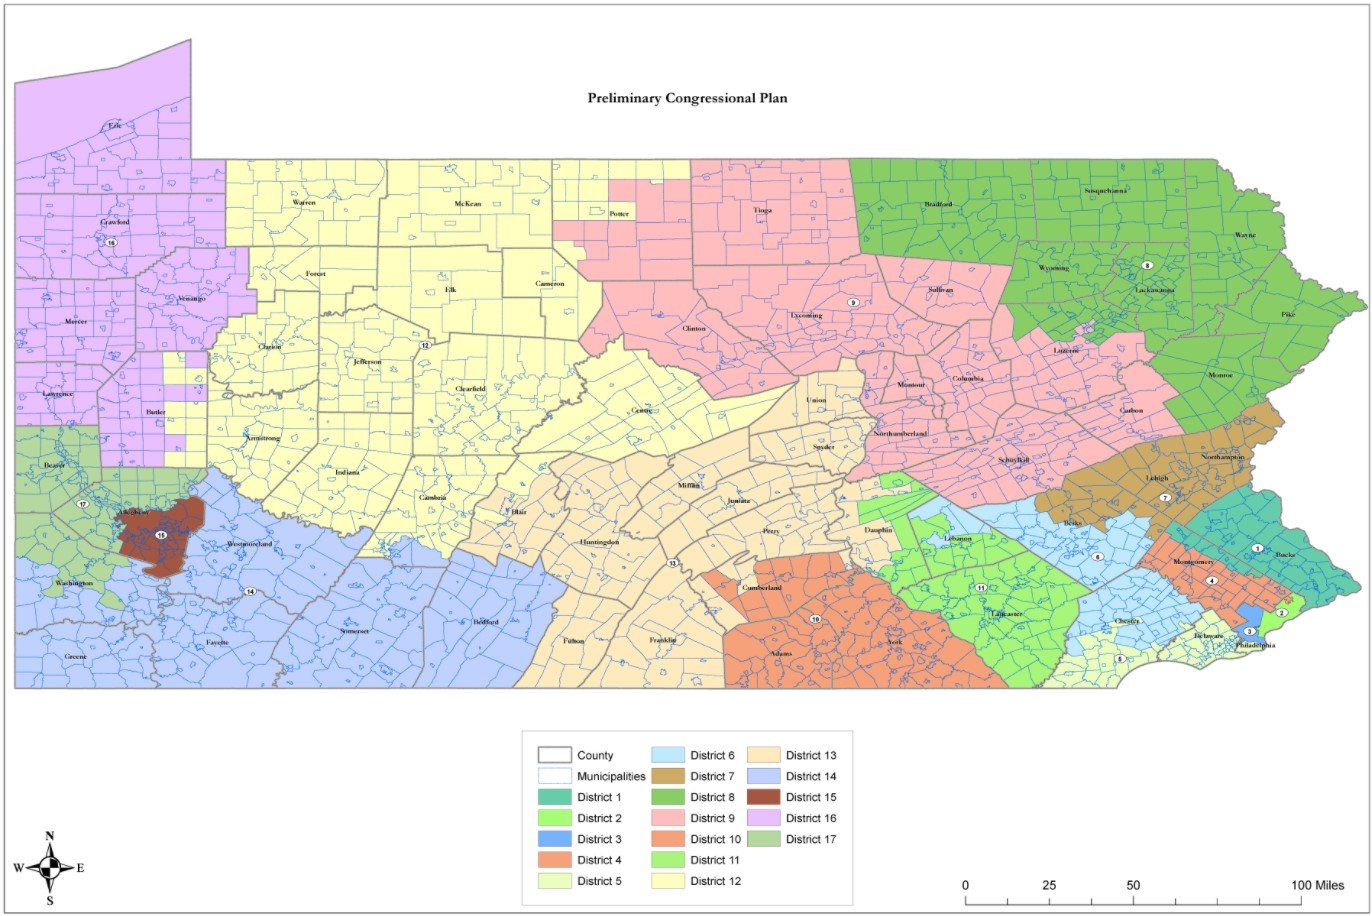 The preliminary plan, submitted through the committee’s online mapping tool by Lehigh County resident Amanda Holt, is now posted for public comment. Holt’s map was one of the 19 verified statewide maps submitted to the committee.